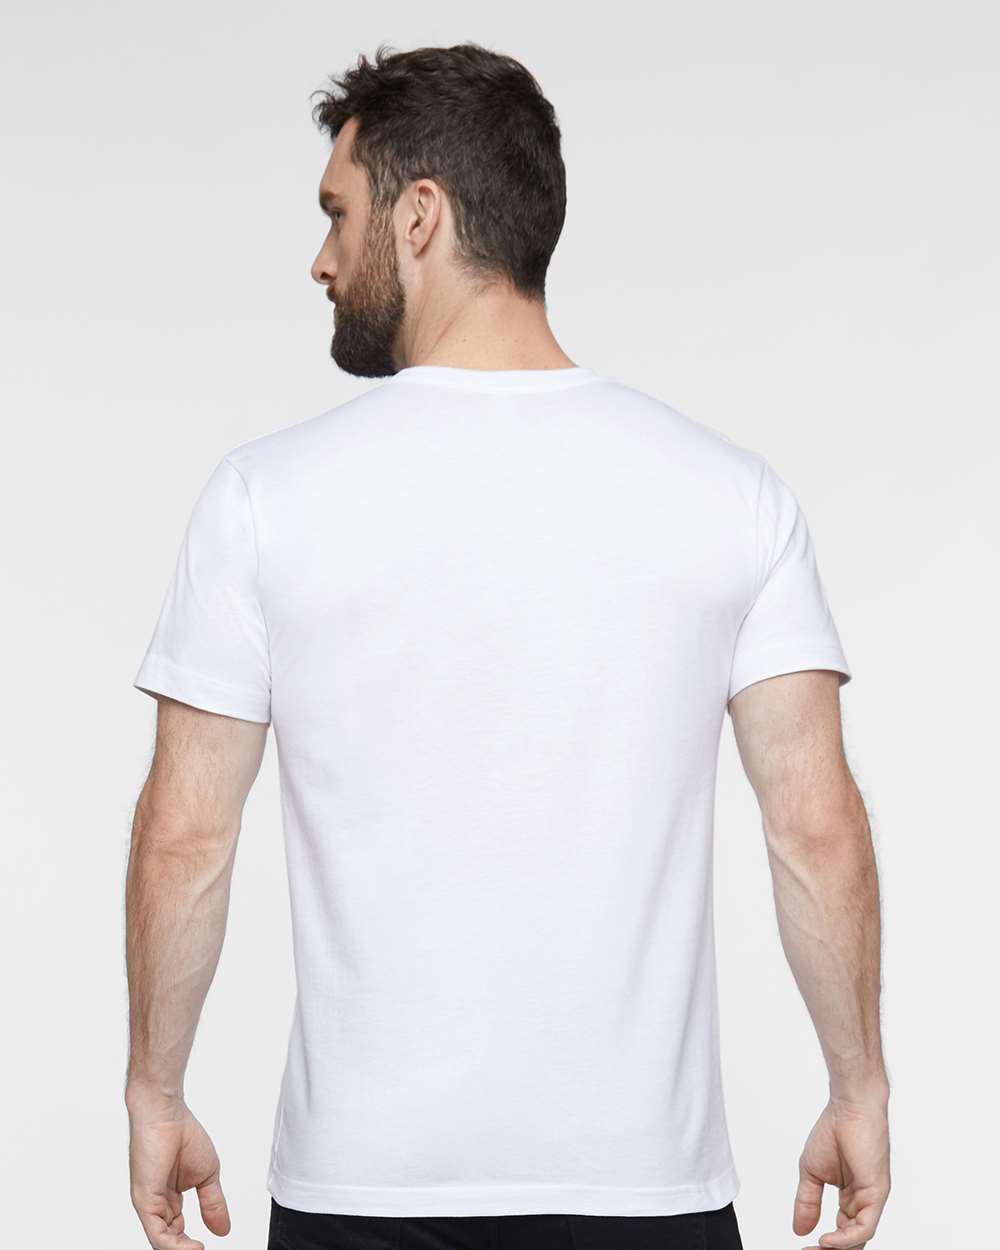 Premium Photo  Isolated front and back white t-shirt on a man